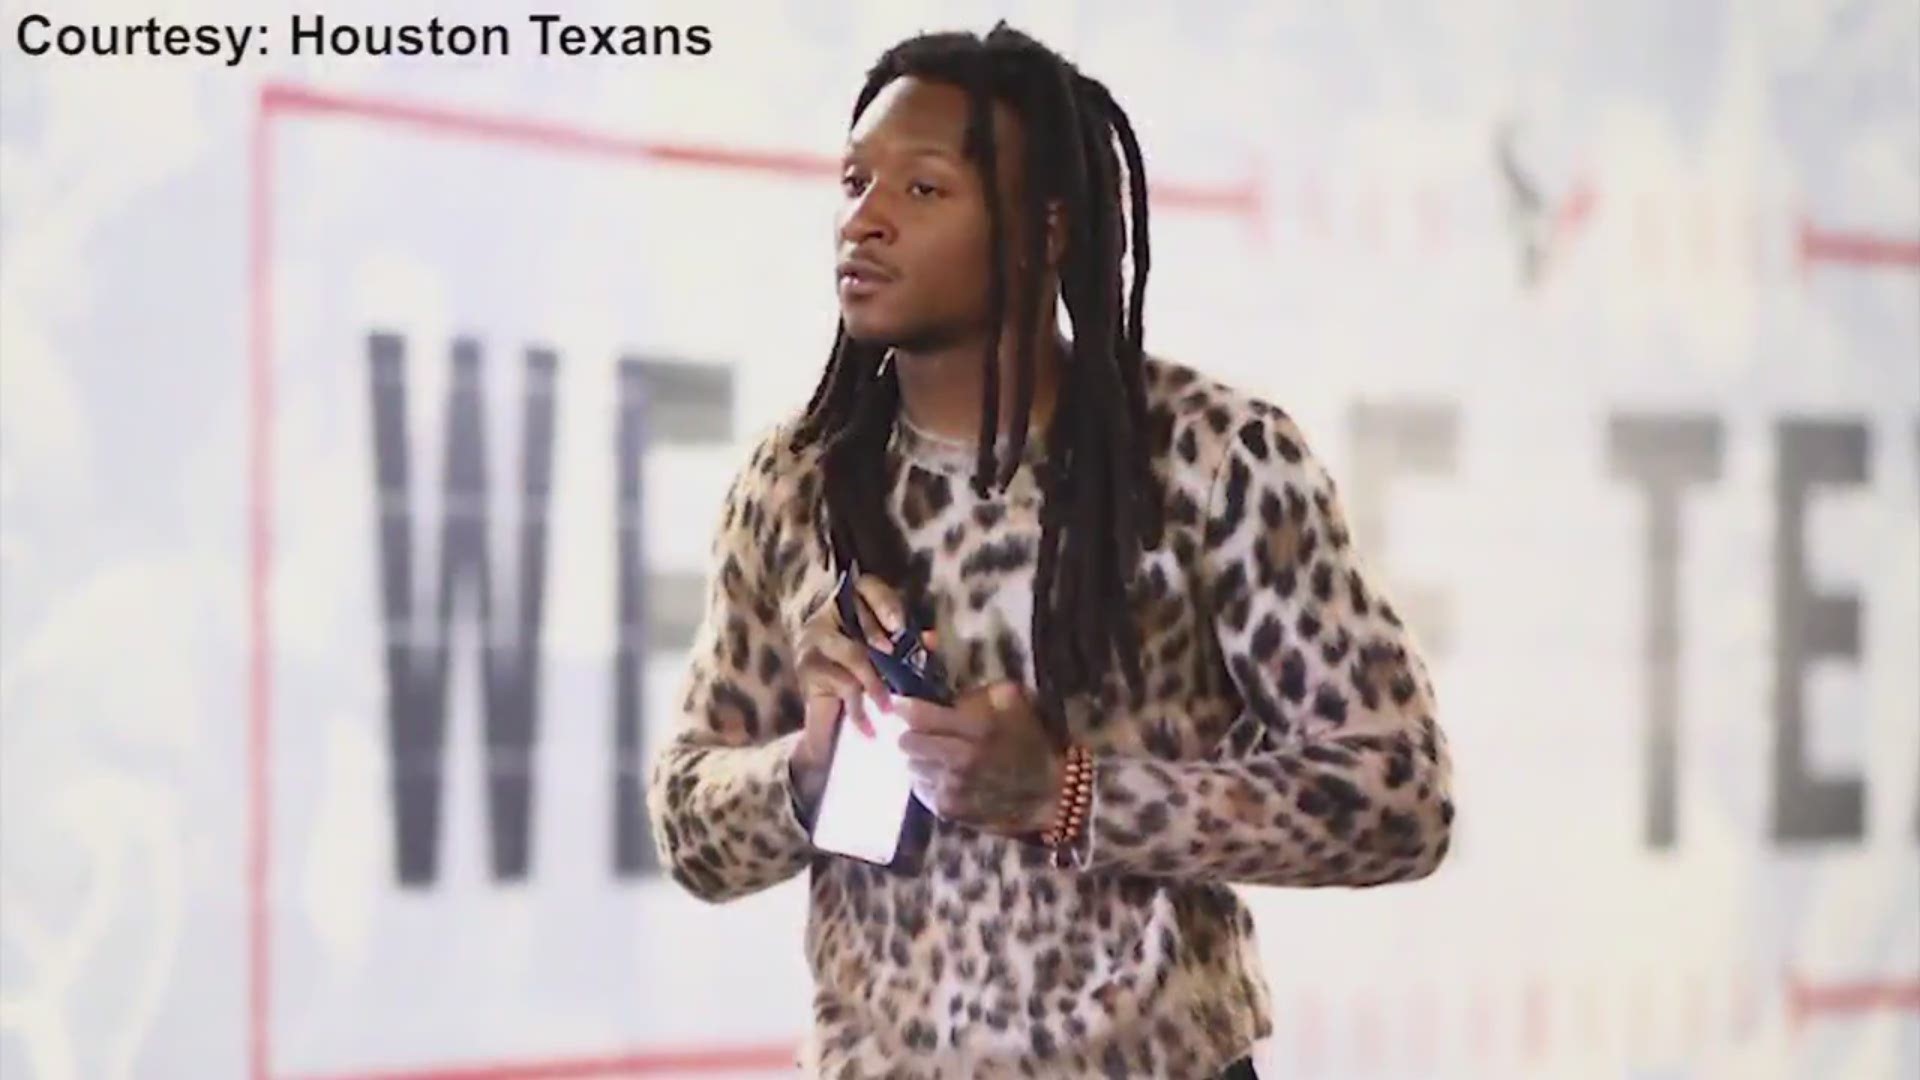 Texans wide receiver DeAndre Hopkins tells us about his pregame attire following Houston's 20-3 win against the Jacksonville Jaguars at NRG Stadium.